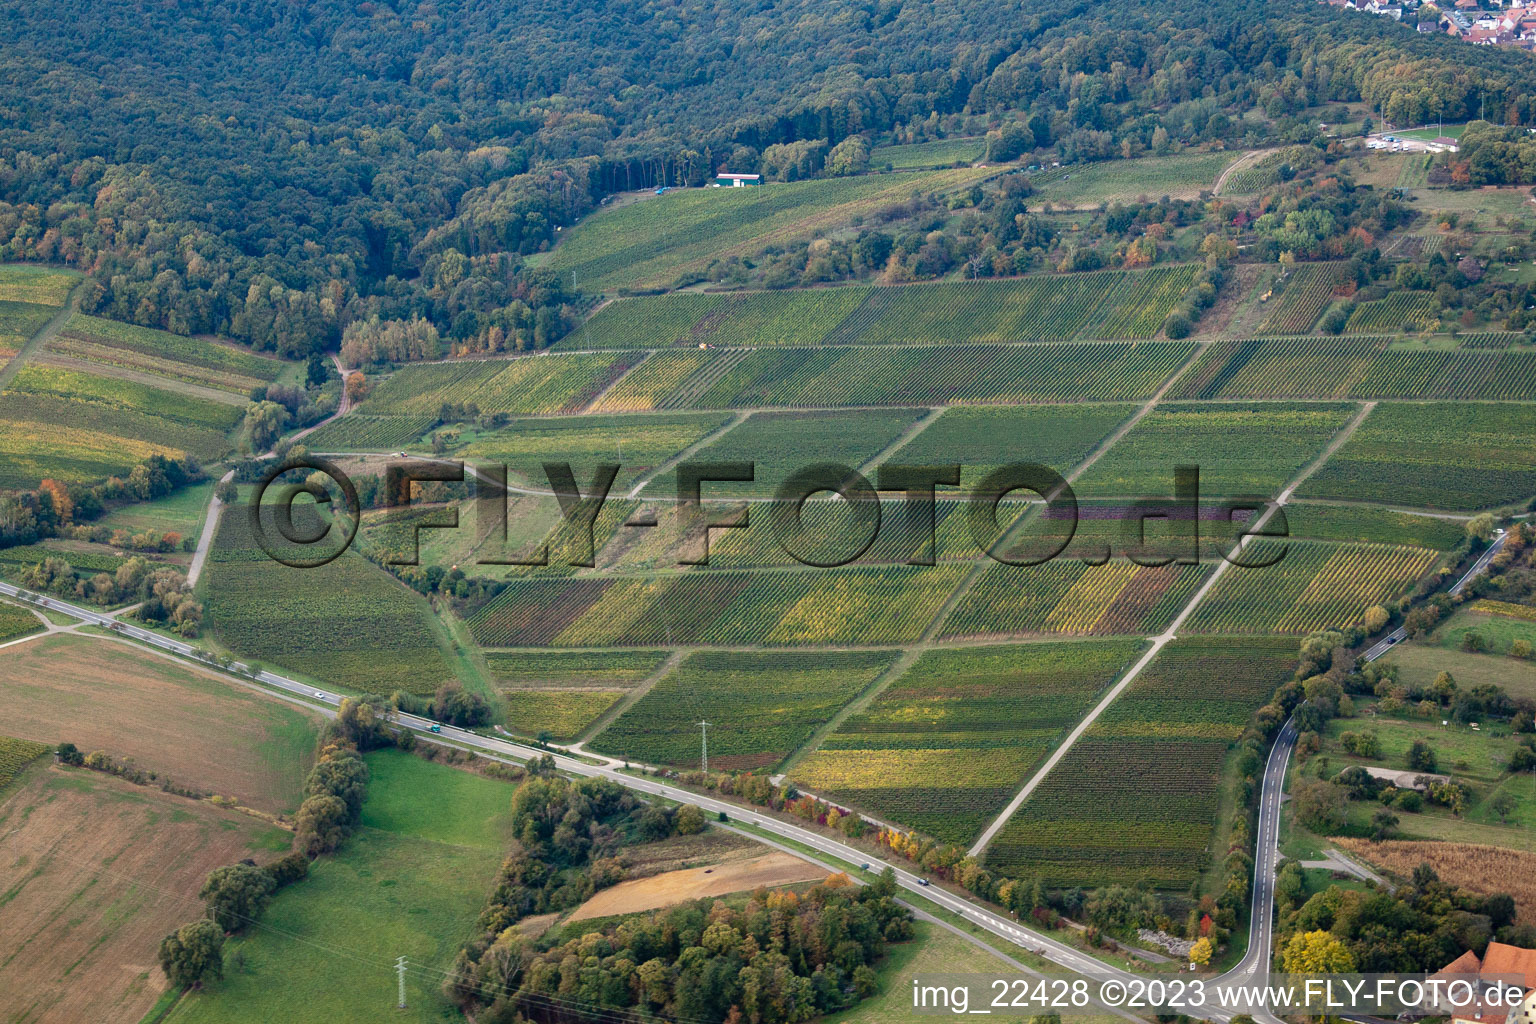 Dörrenbach in the state Rhineland-Palatinate, Germany out of the air